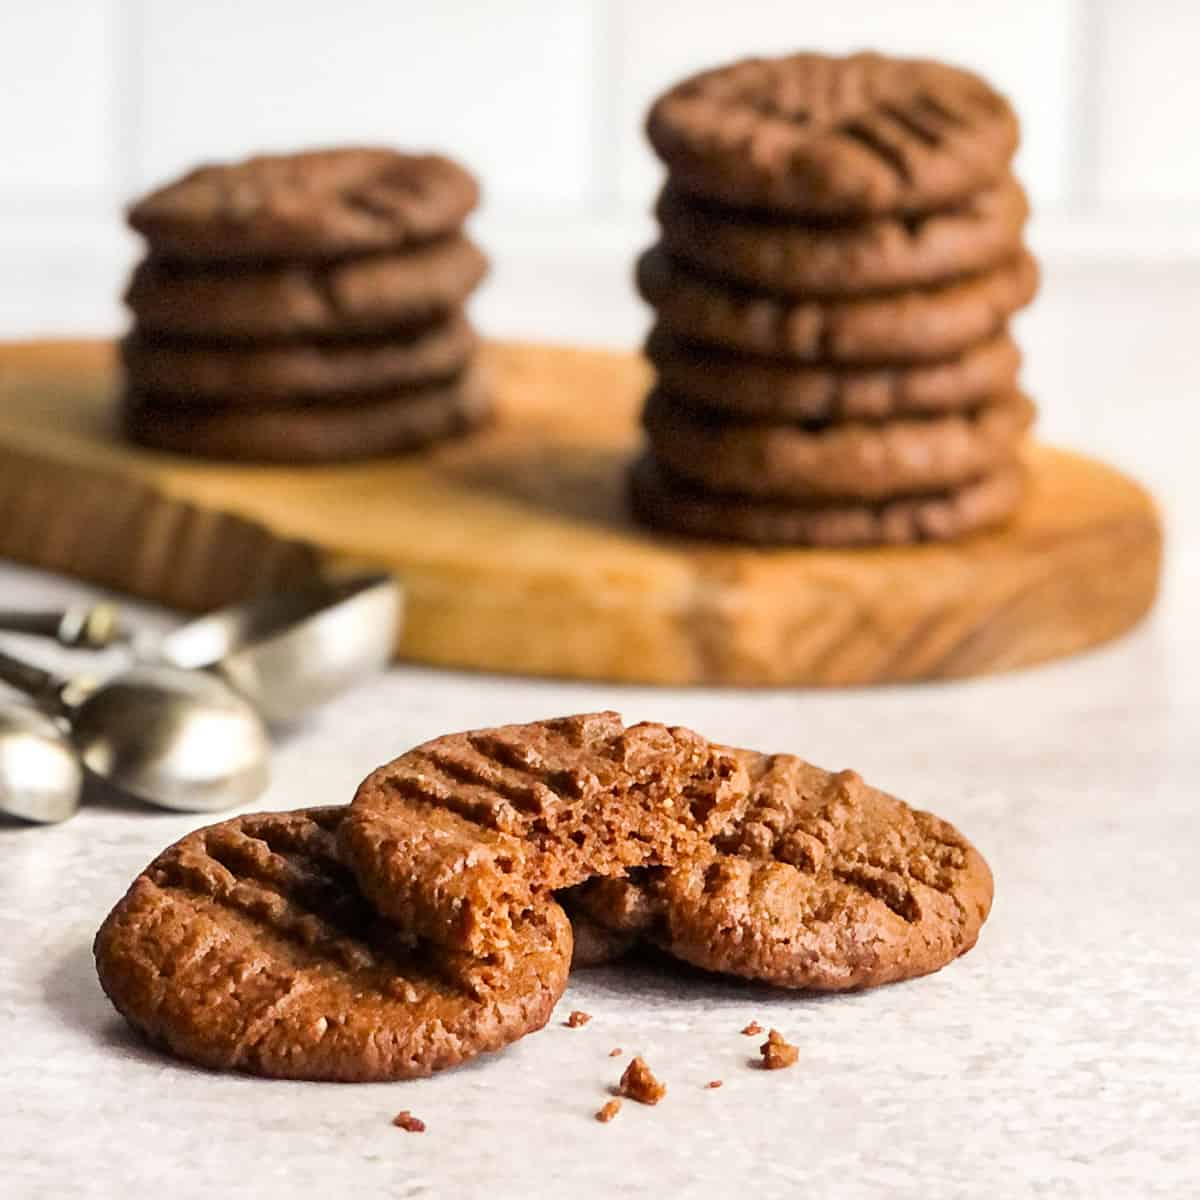 Three almond butter cookies with stacks of cookies in background.